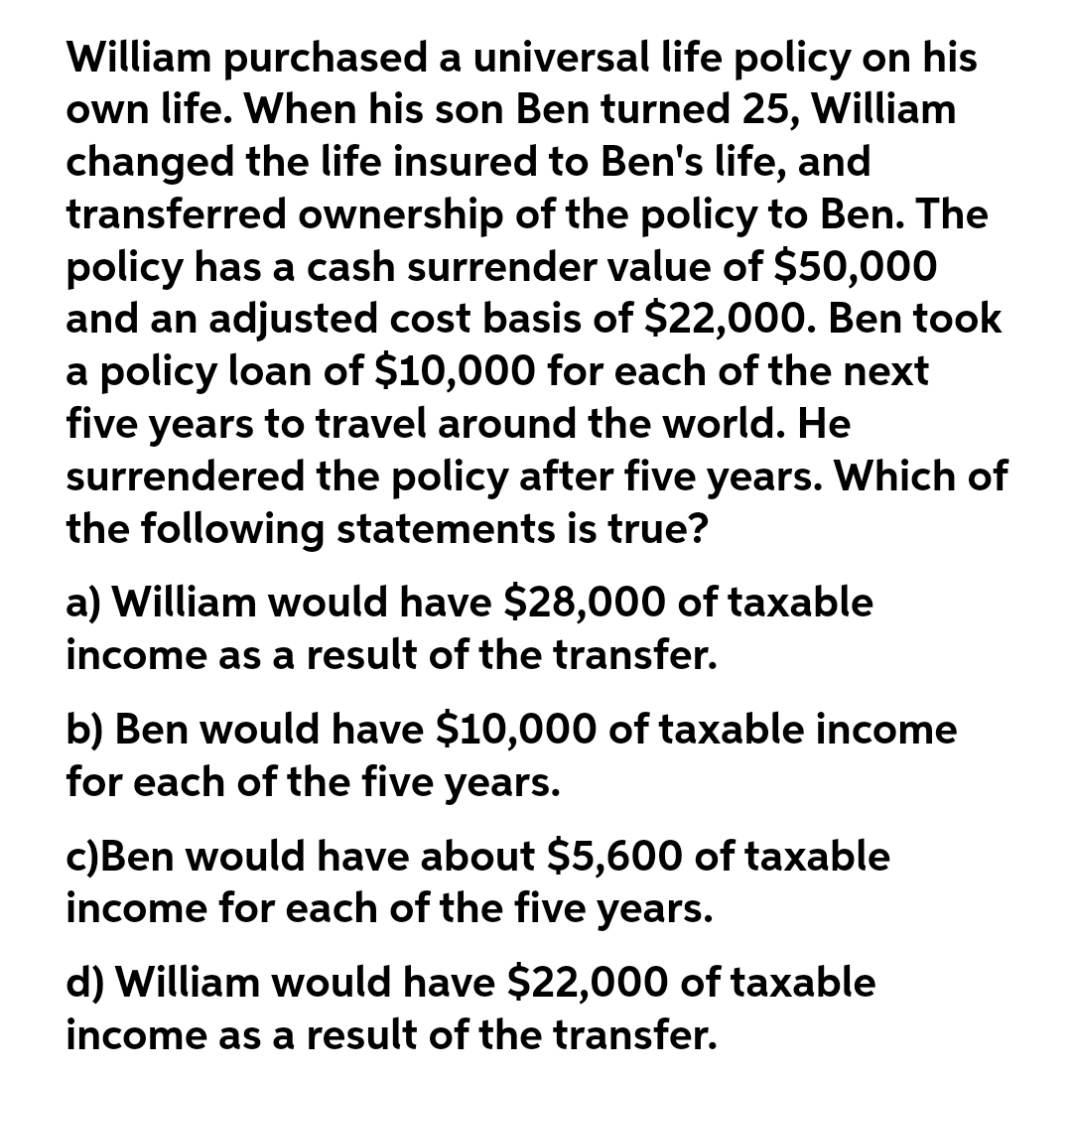 William purchased a universal life policy on his
own life. When his son Ben turned 25, William
changed the life insured to Ben's life, and
transferred ownership of the policy to Ben. The
policy has a cash surrender value of $50,000
and an adjusted cost basis of $22,000. Ben took
a policy loan of $10,000 for each of the next
five years to travel around the world. He
surrendered the policy after five years. Which of
the following statements is true?
a) William would have $28,000 of taxable
income as a result of the transfer.
b) Ben would have $10,000 of taxable income
for each of the five years.
c)Ben would have about $5,600 of taxable
income for each of the five years.
d) William would have $22,000 of taxable
income as a result of the transfer.